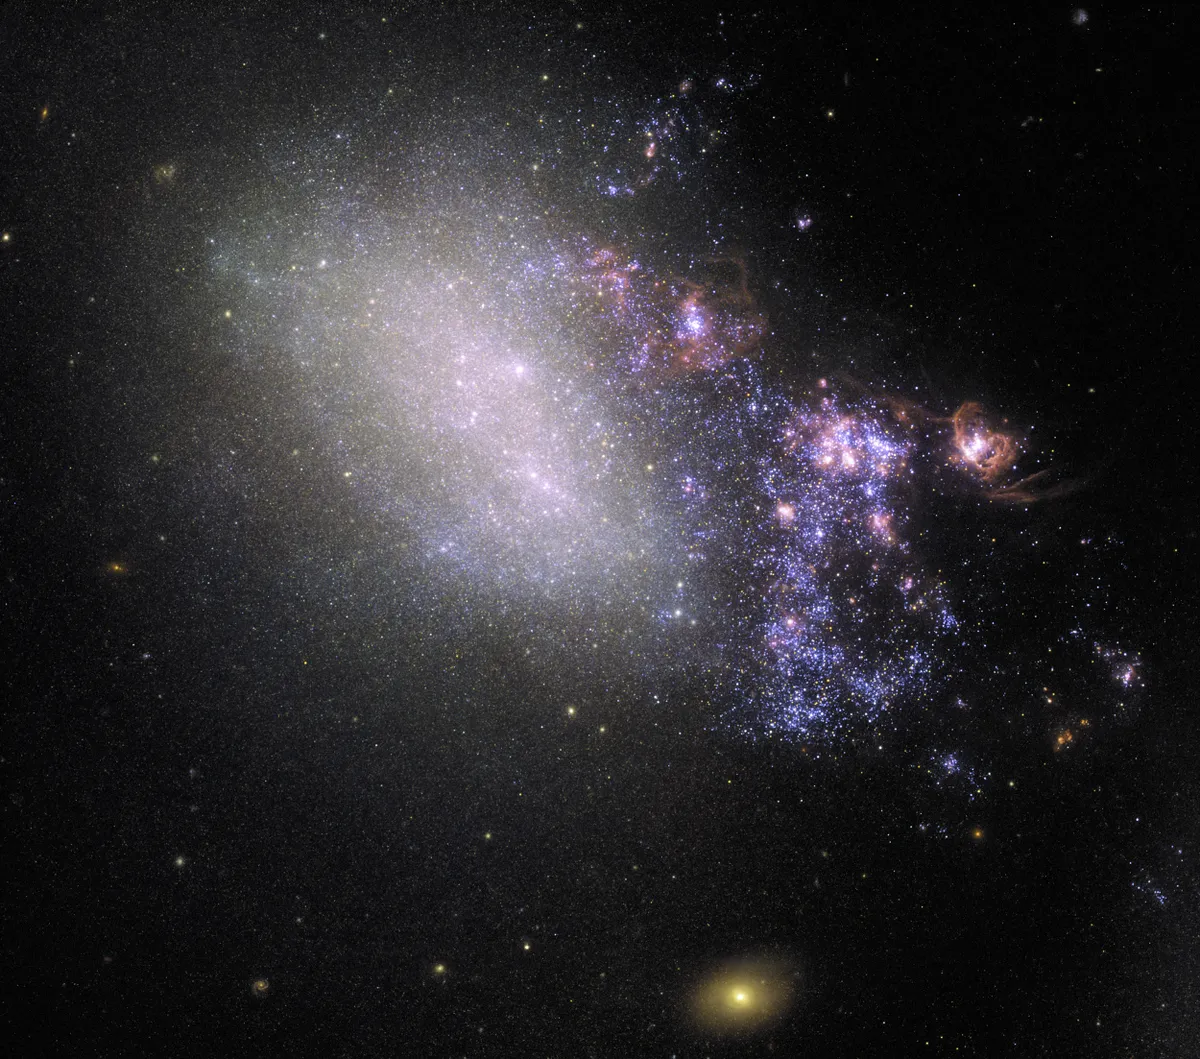 Irregular Galaxy NGC 4485, as seen by the Hubble Space Telescope, 16 May 2019.